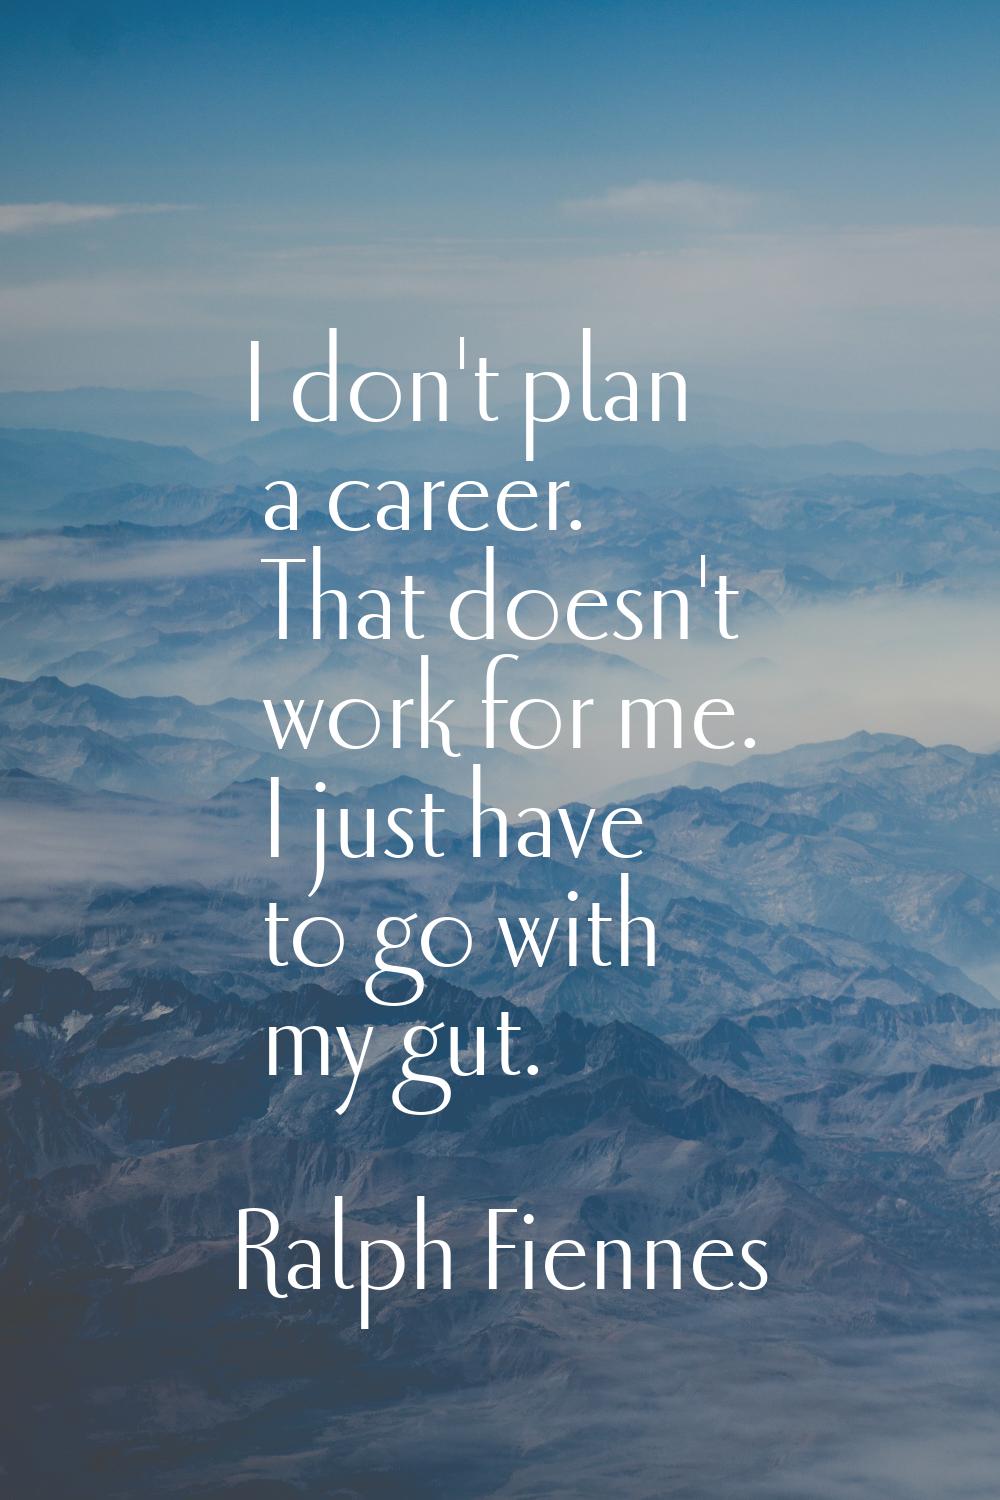 I don't plan a career. That doesn't work for me. I just have to go with my gut.